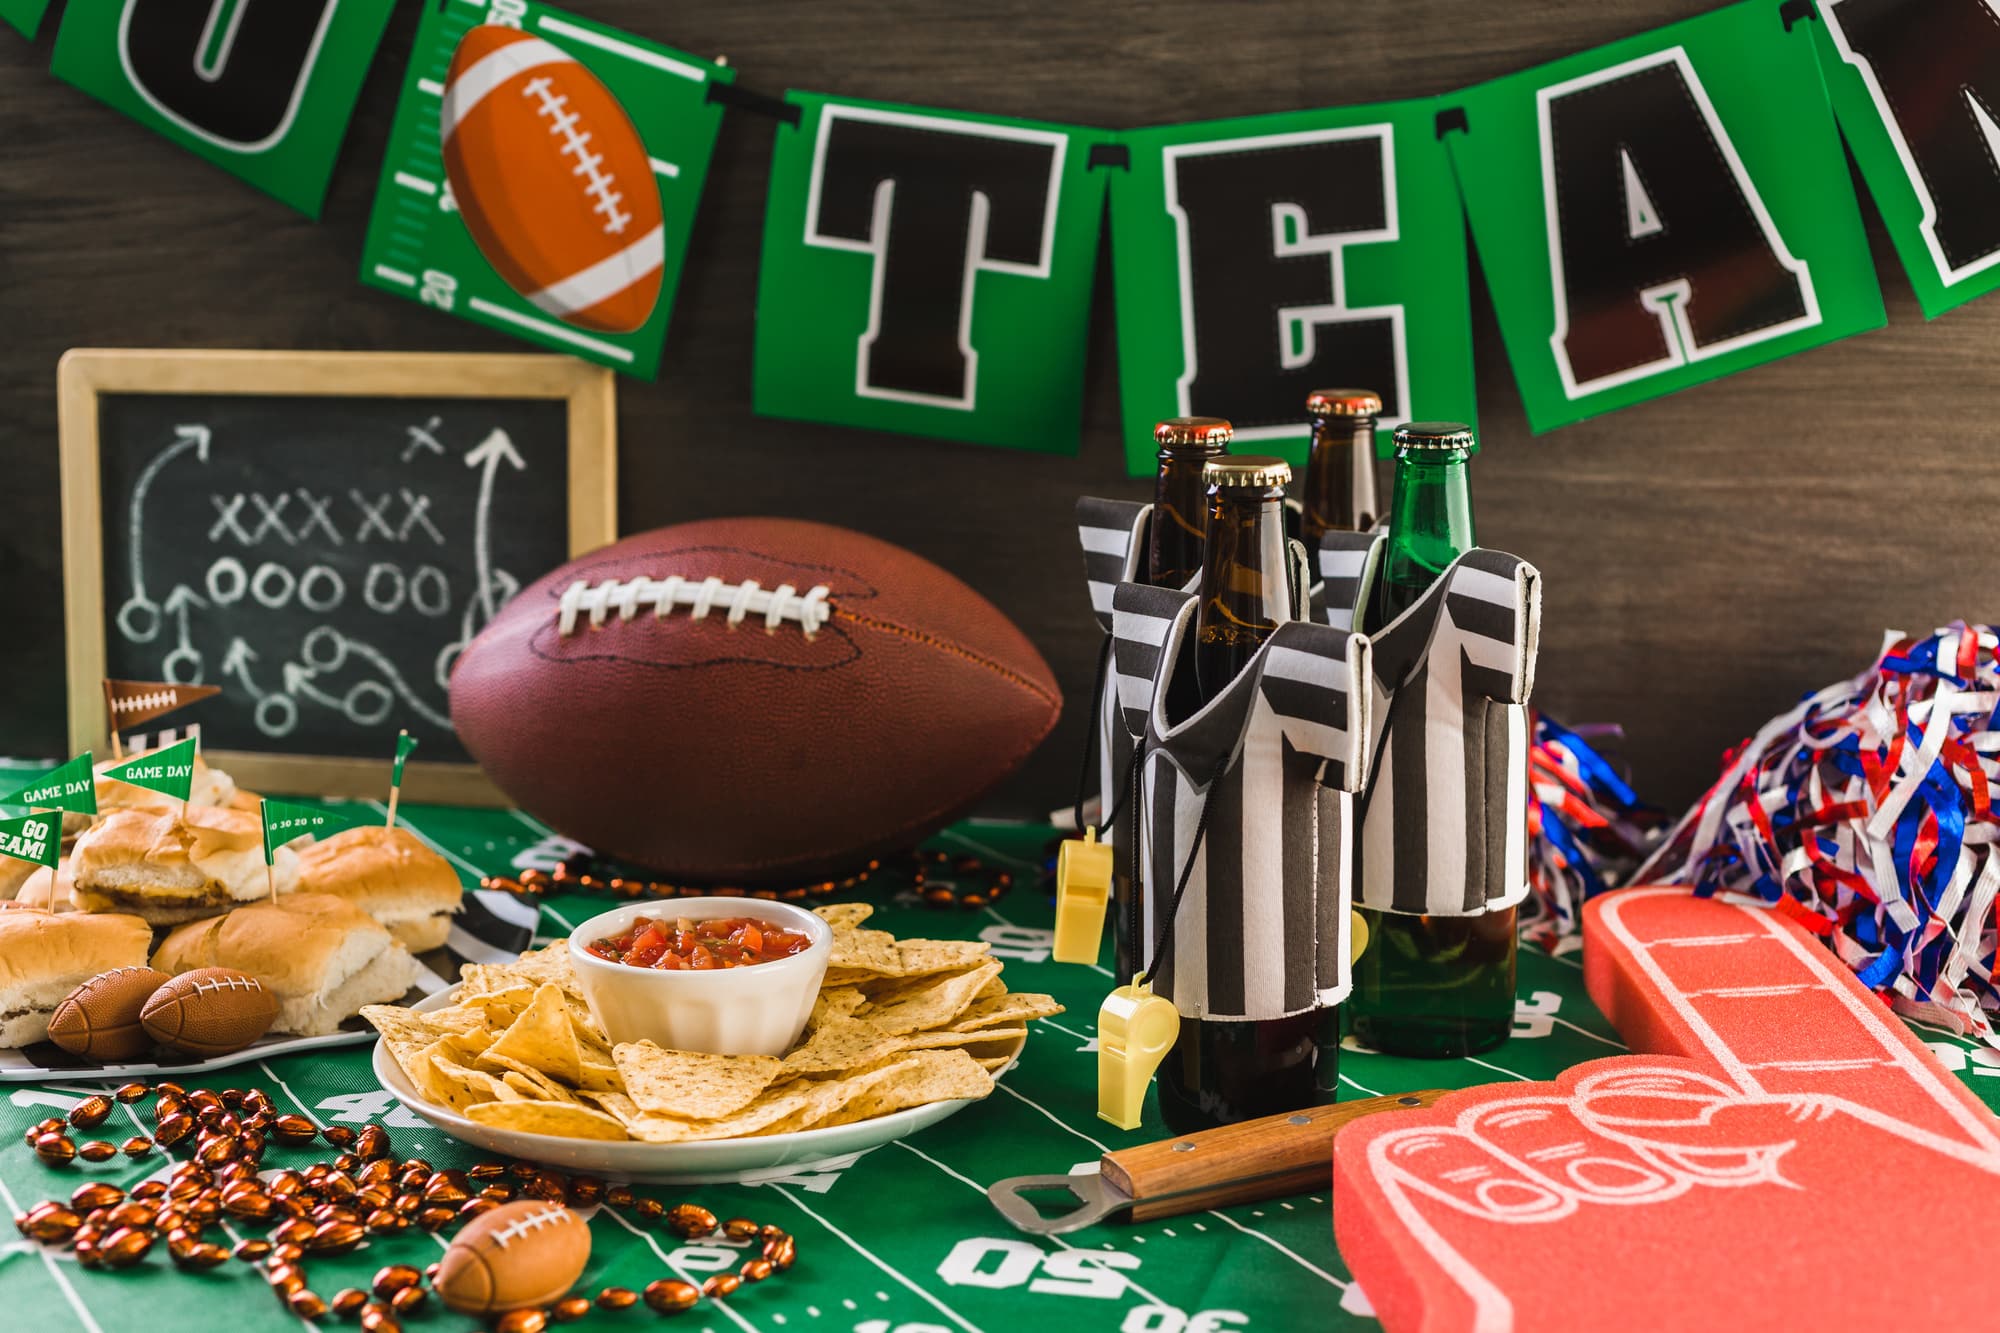 5 Catering Tips for Your Super Bowl Party